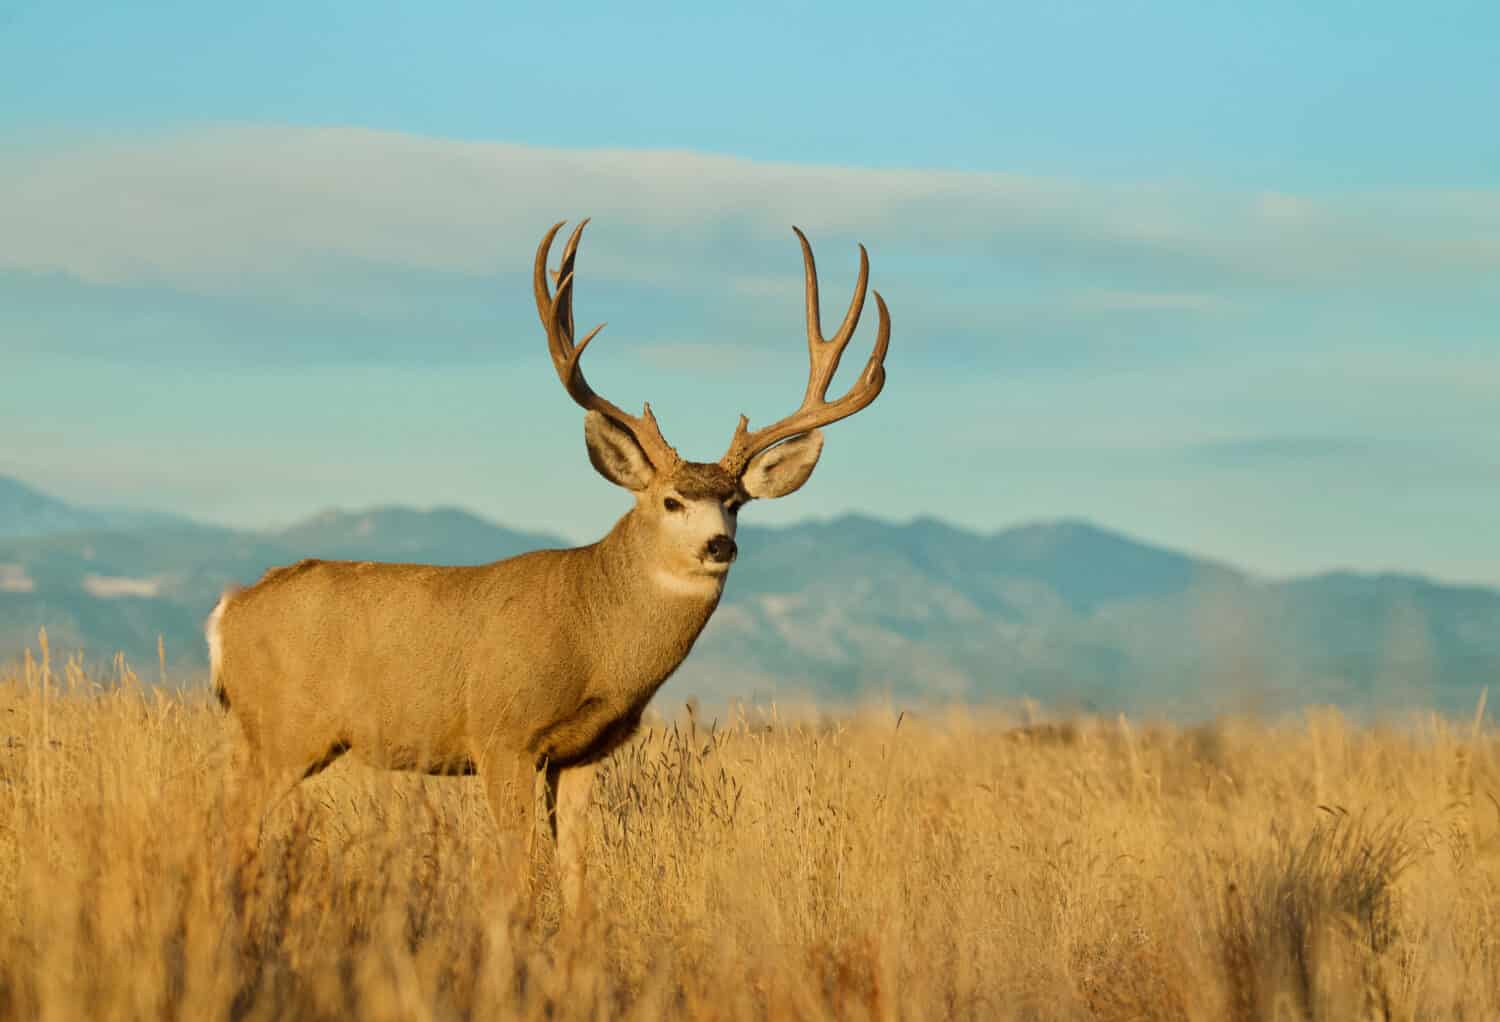 Mule Deer buck environmental portrait with the Rocky Mountain foothills in the background